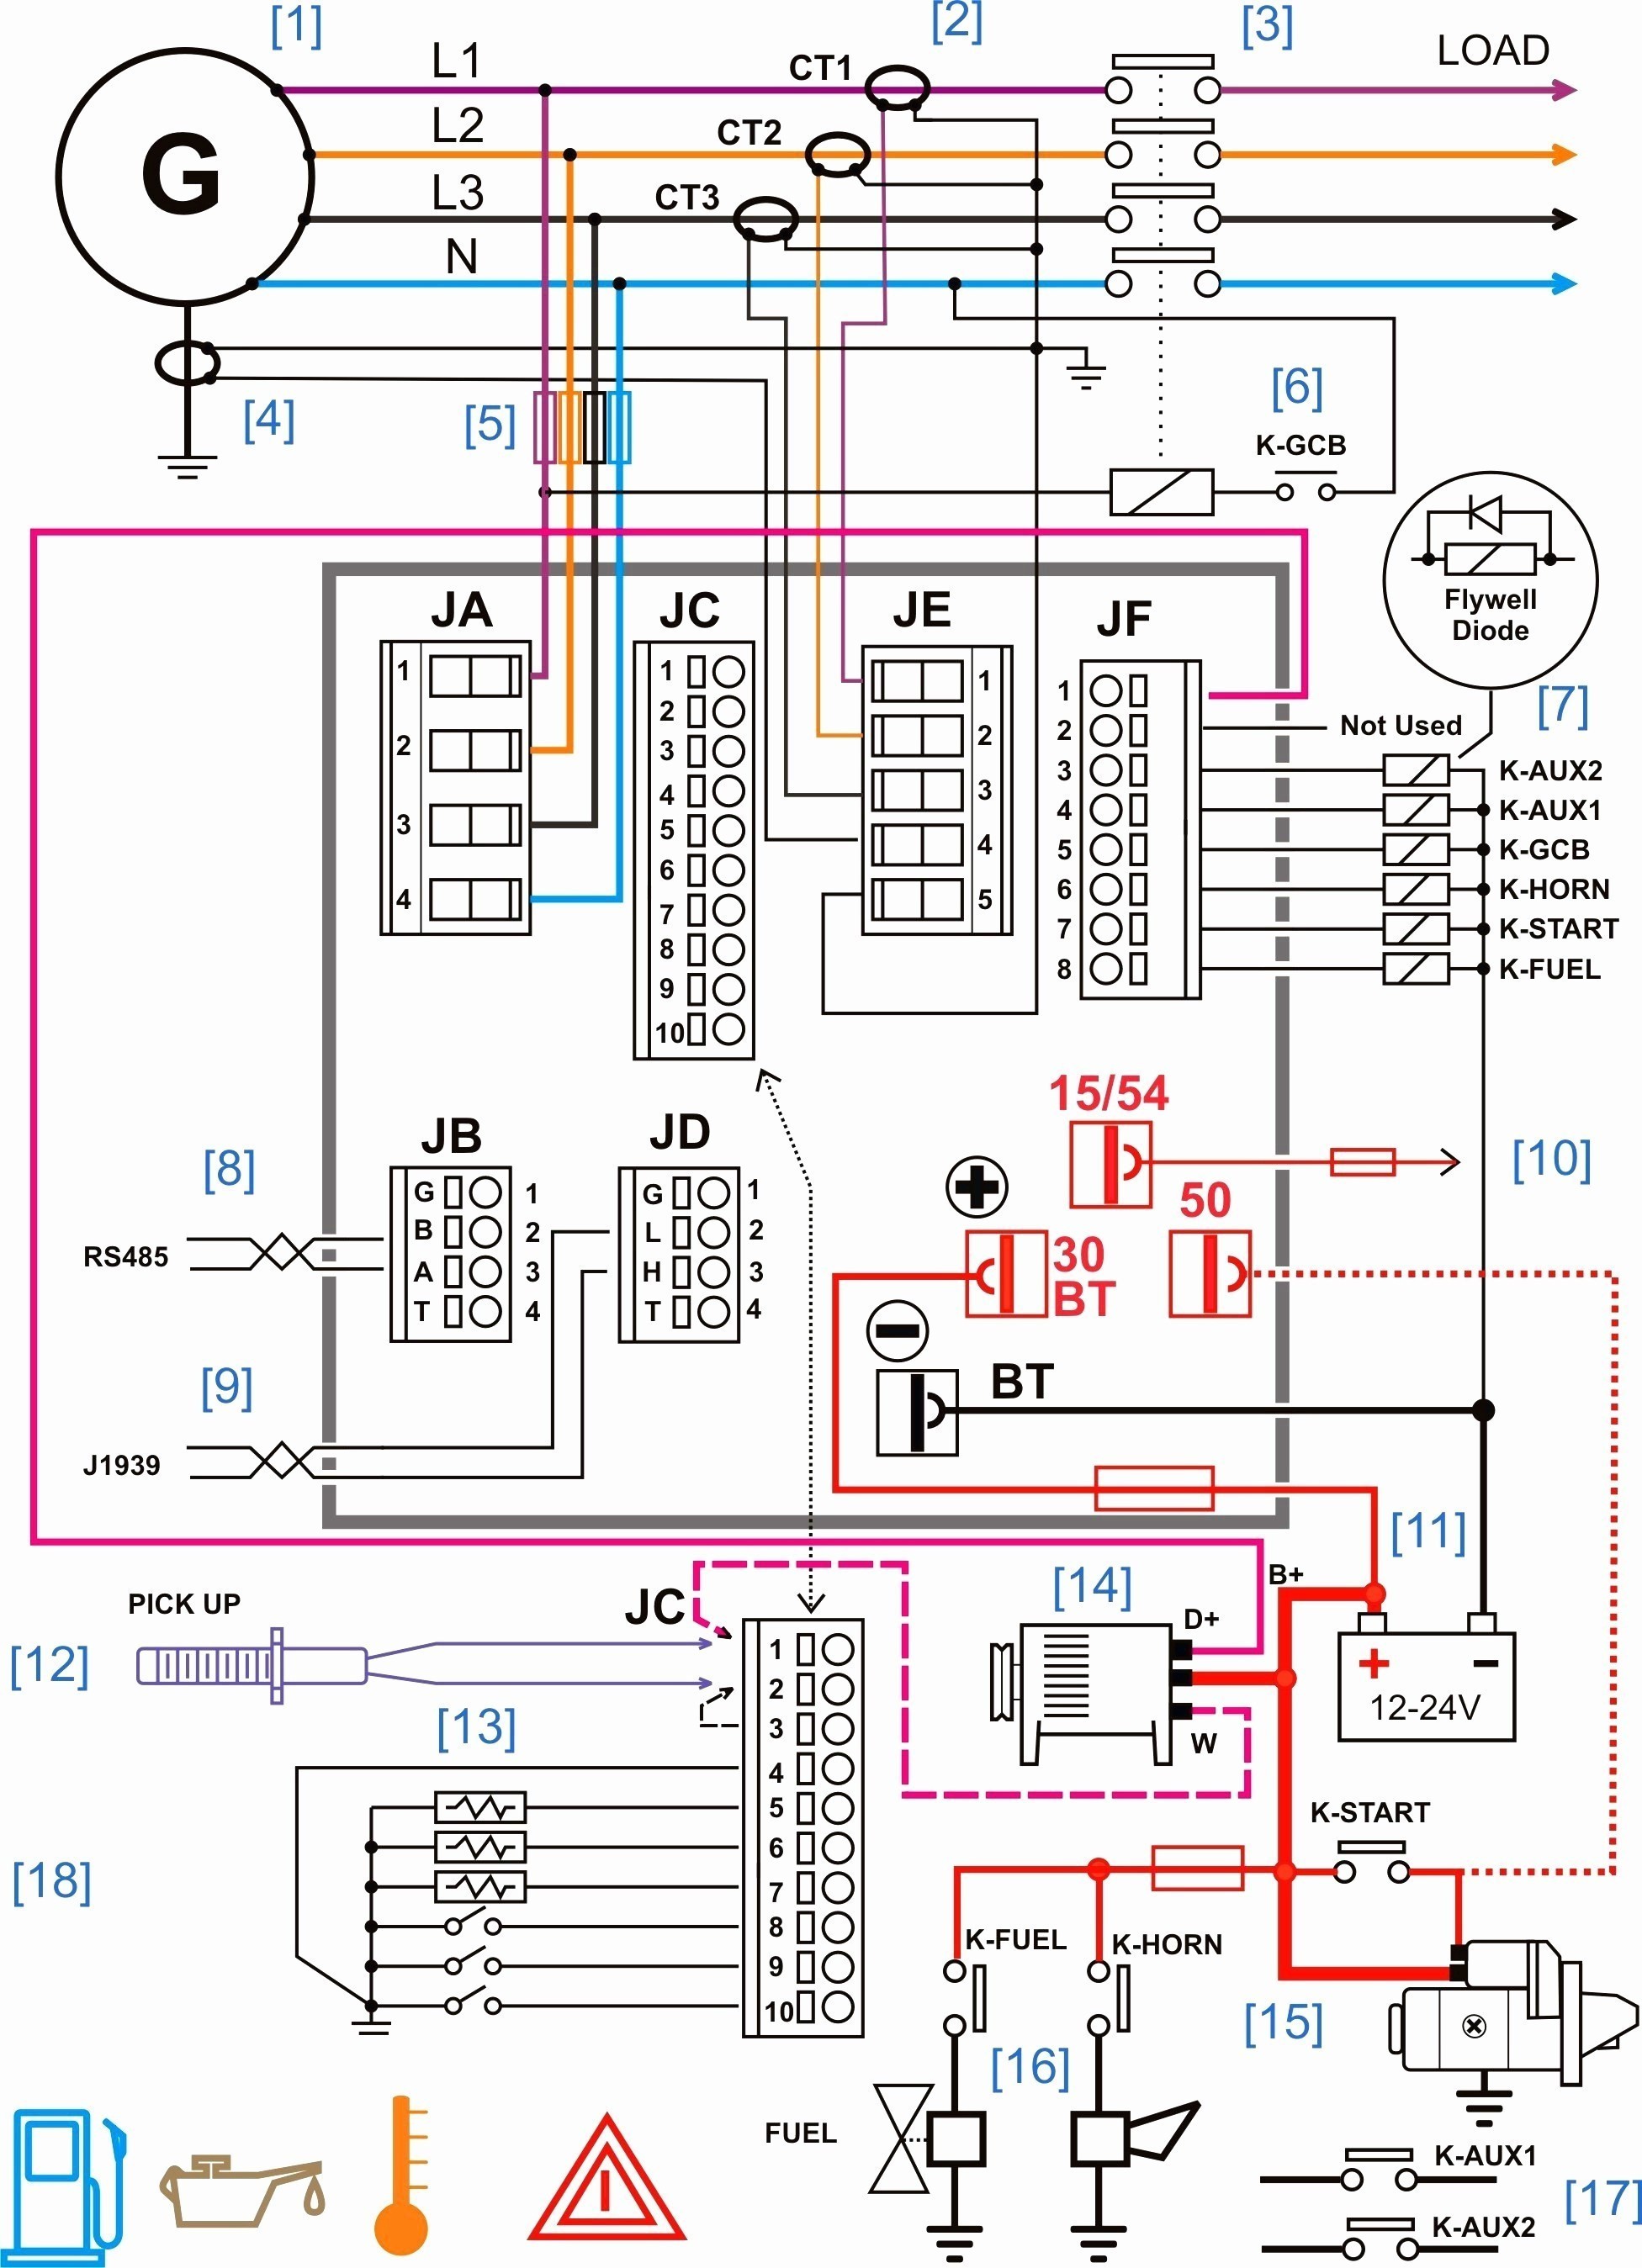 Wiring Diagram Jvc Car Stereo Refrence Automotive Stereo Wiring Diagram Of Wiring Diagram Jvc Car Stereo